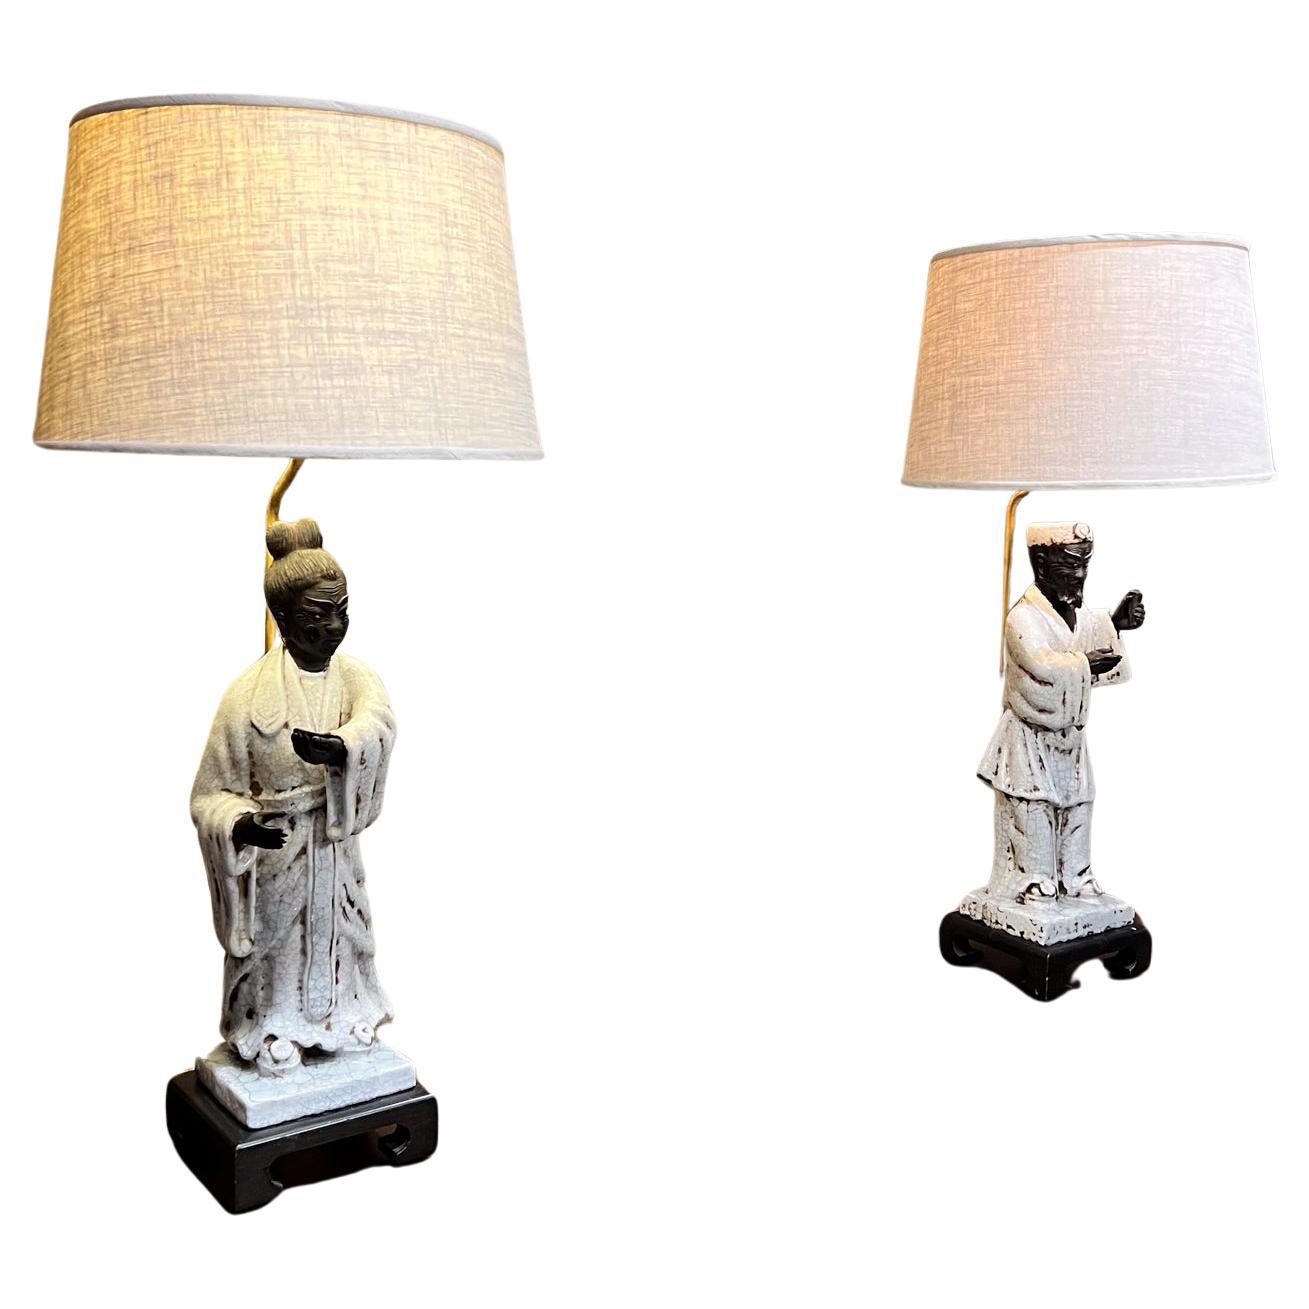 Italy 1950s Marcello Fantoni Asian Figural Table Lamps 
Italian Glazed Ceramic with Enamel Finish Brass Wood
Signed
Finely Carved Man & Woman Traditional Robe
Square Base Plinth 
33 h to socket x 8 d x 8 w
New cord socket and plug
No shades are